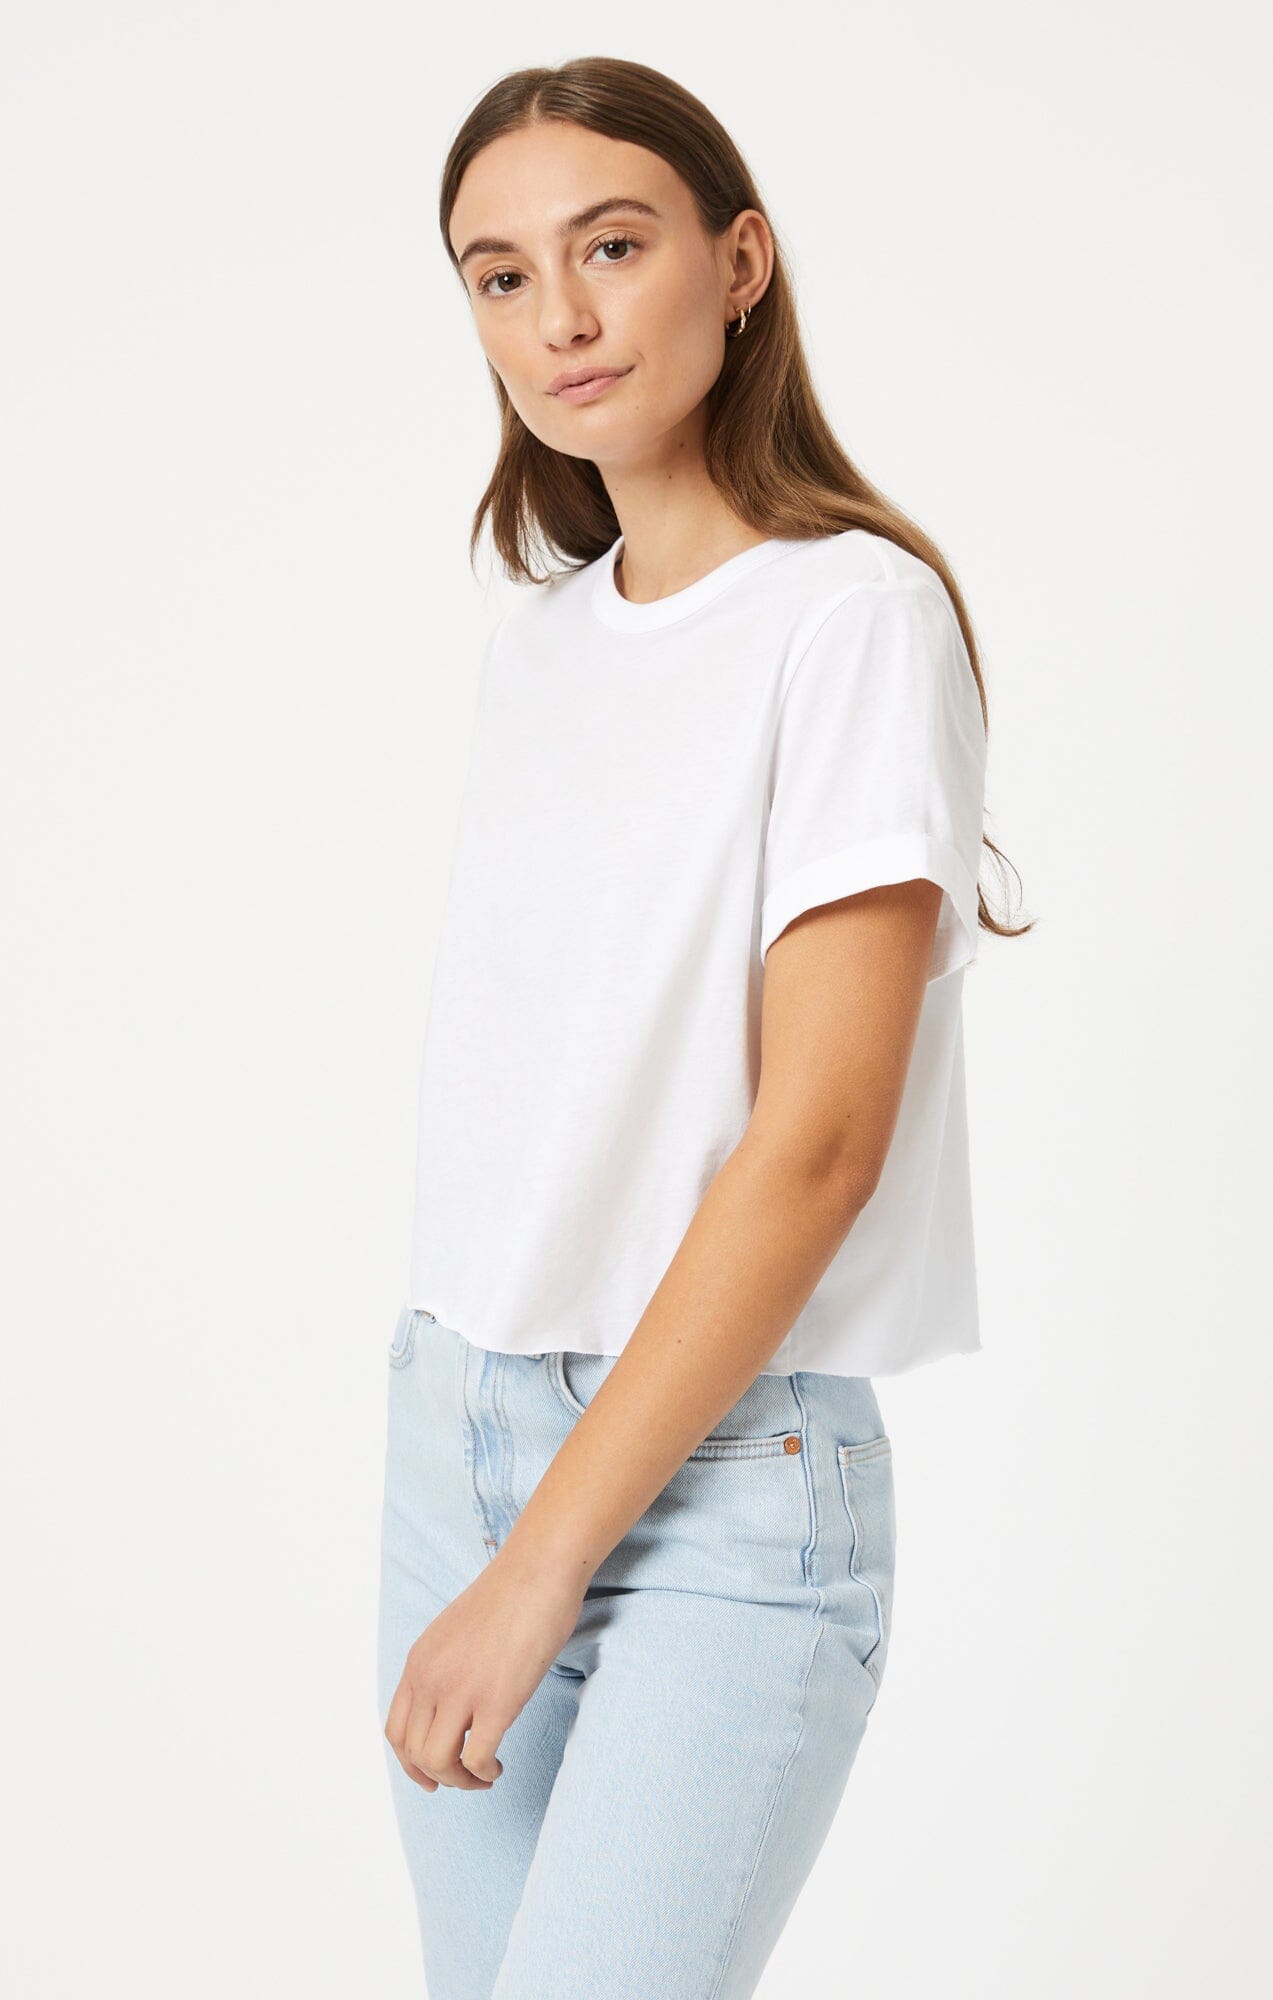 Women´s Cropped T-Shirts, Explore our New Arrivals